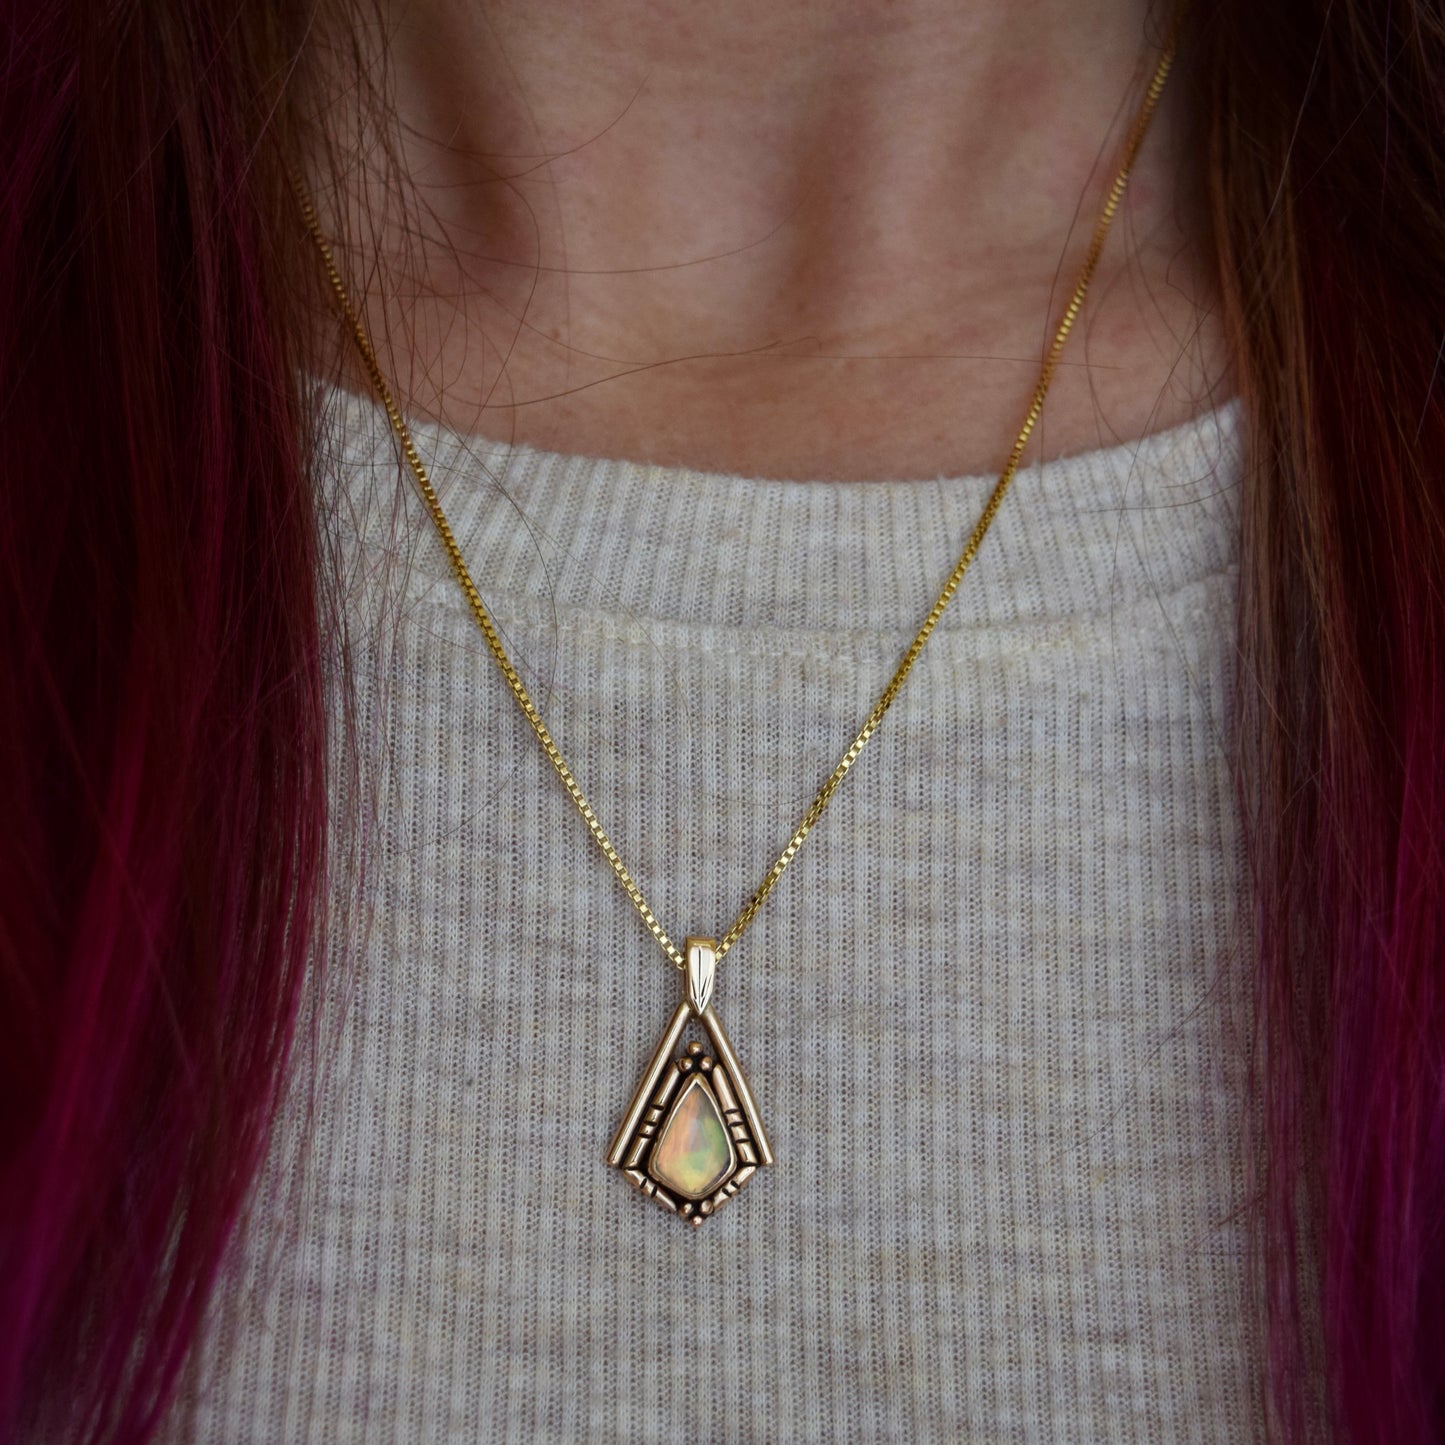 North Star Necklace with Rose Cut Ethiopian Opal and Yellow Gold Fill